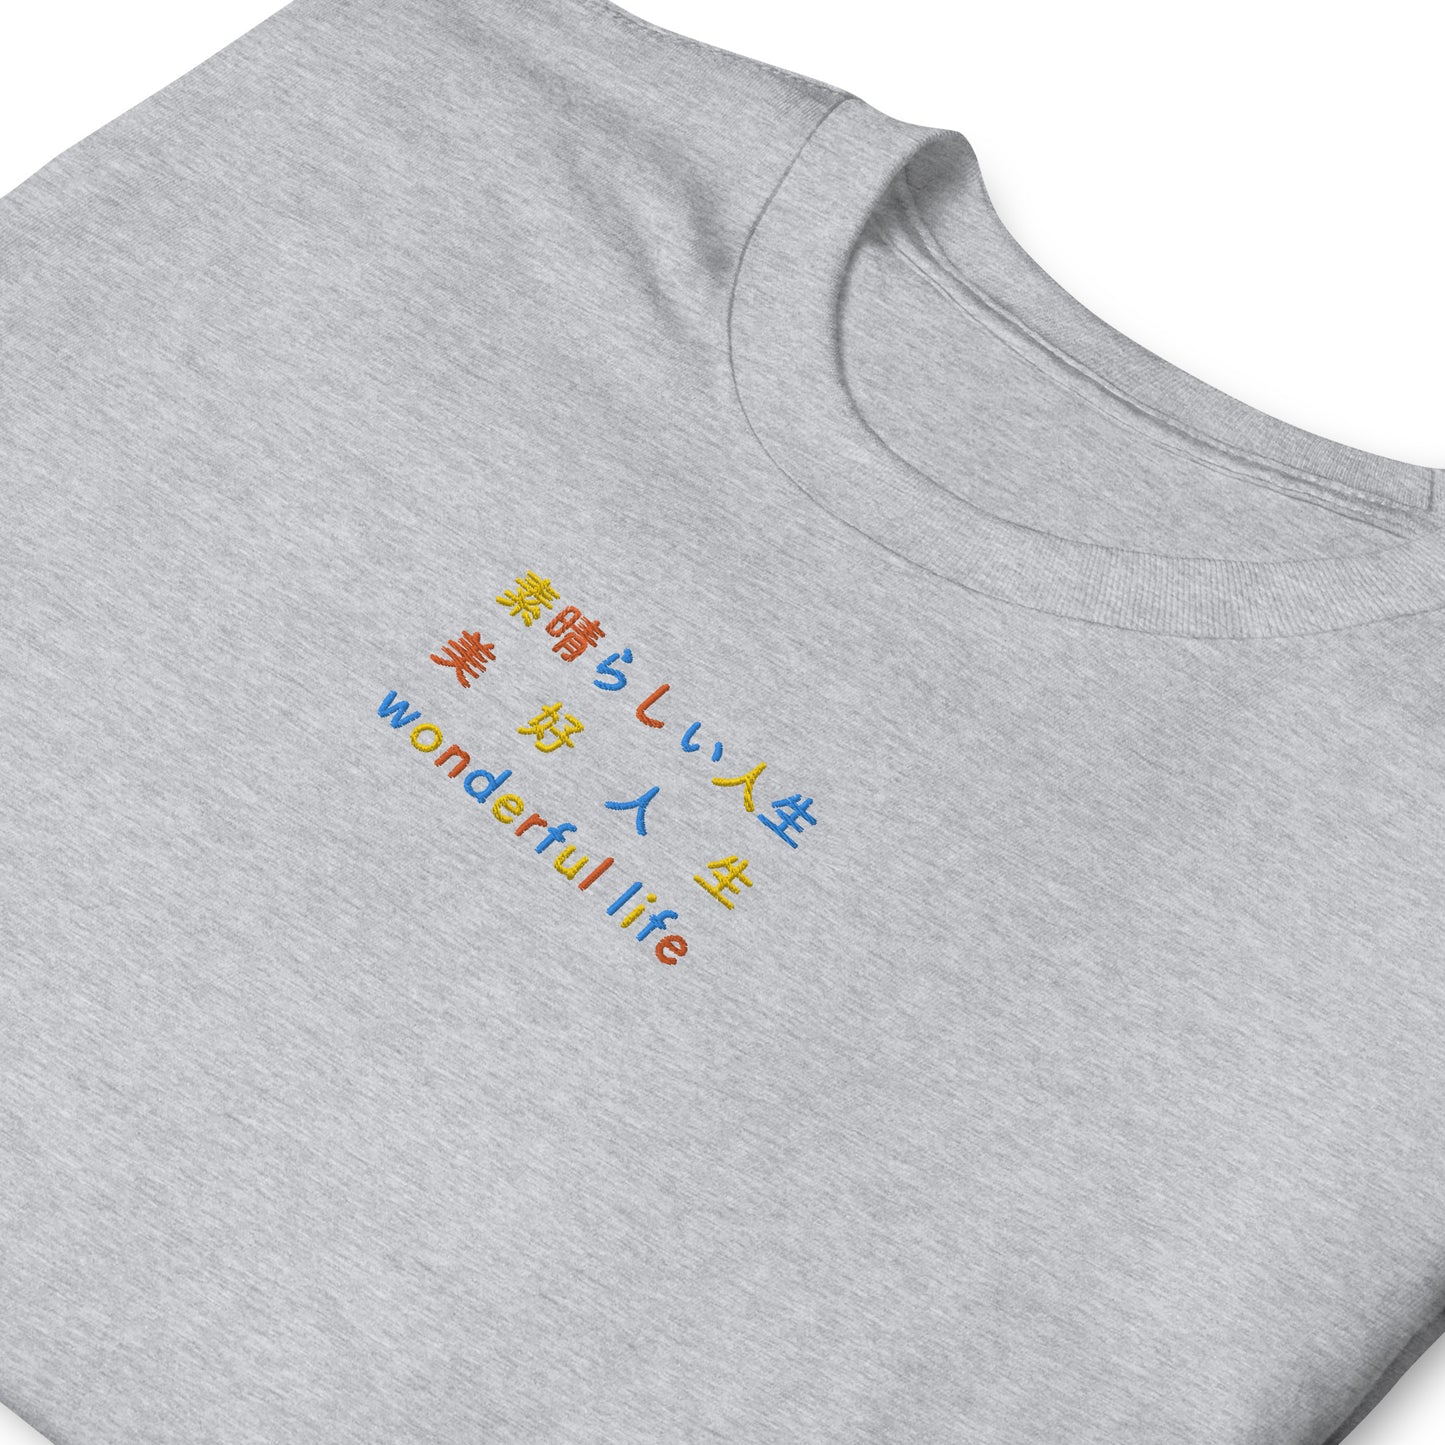 Light Gray High Quality Tee - Front Design with Yellow, Orange and Blue Embroidery "Wonderful Life" in Japanese,Chinese and English